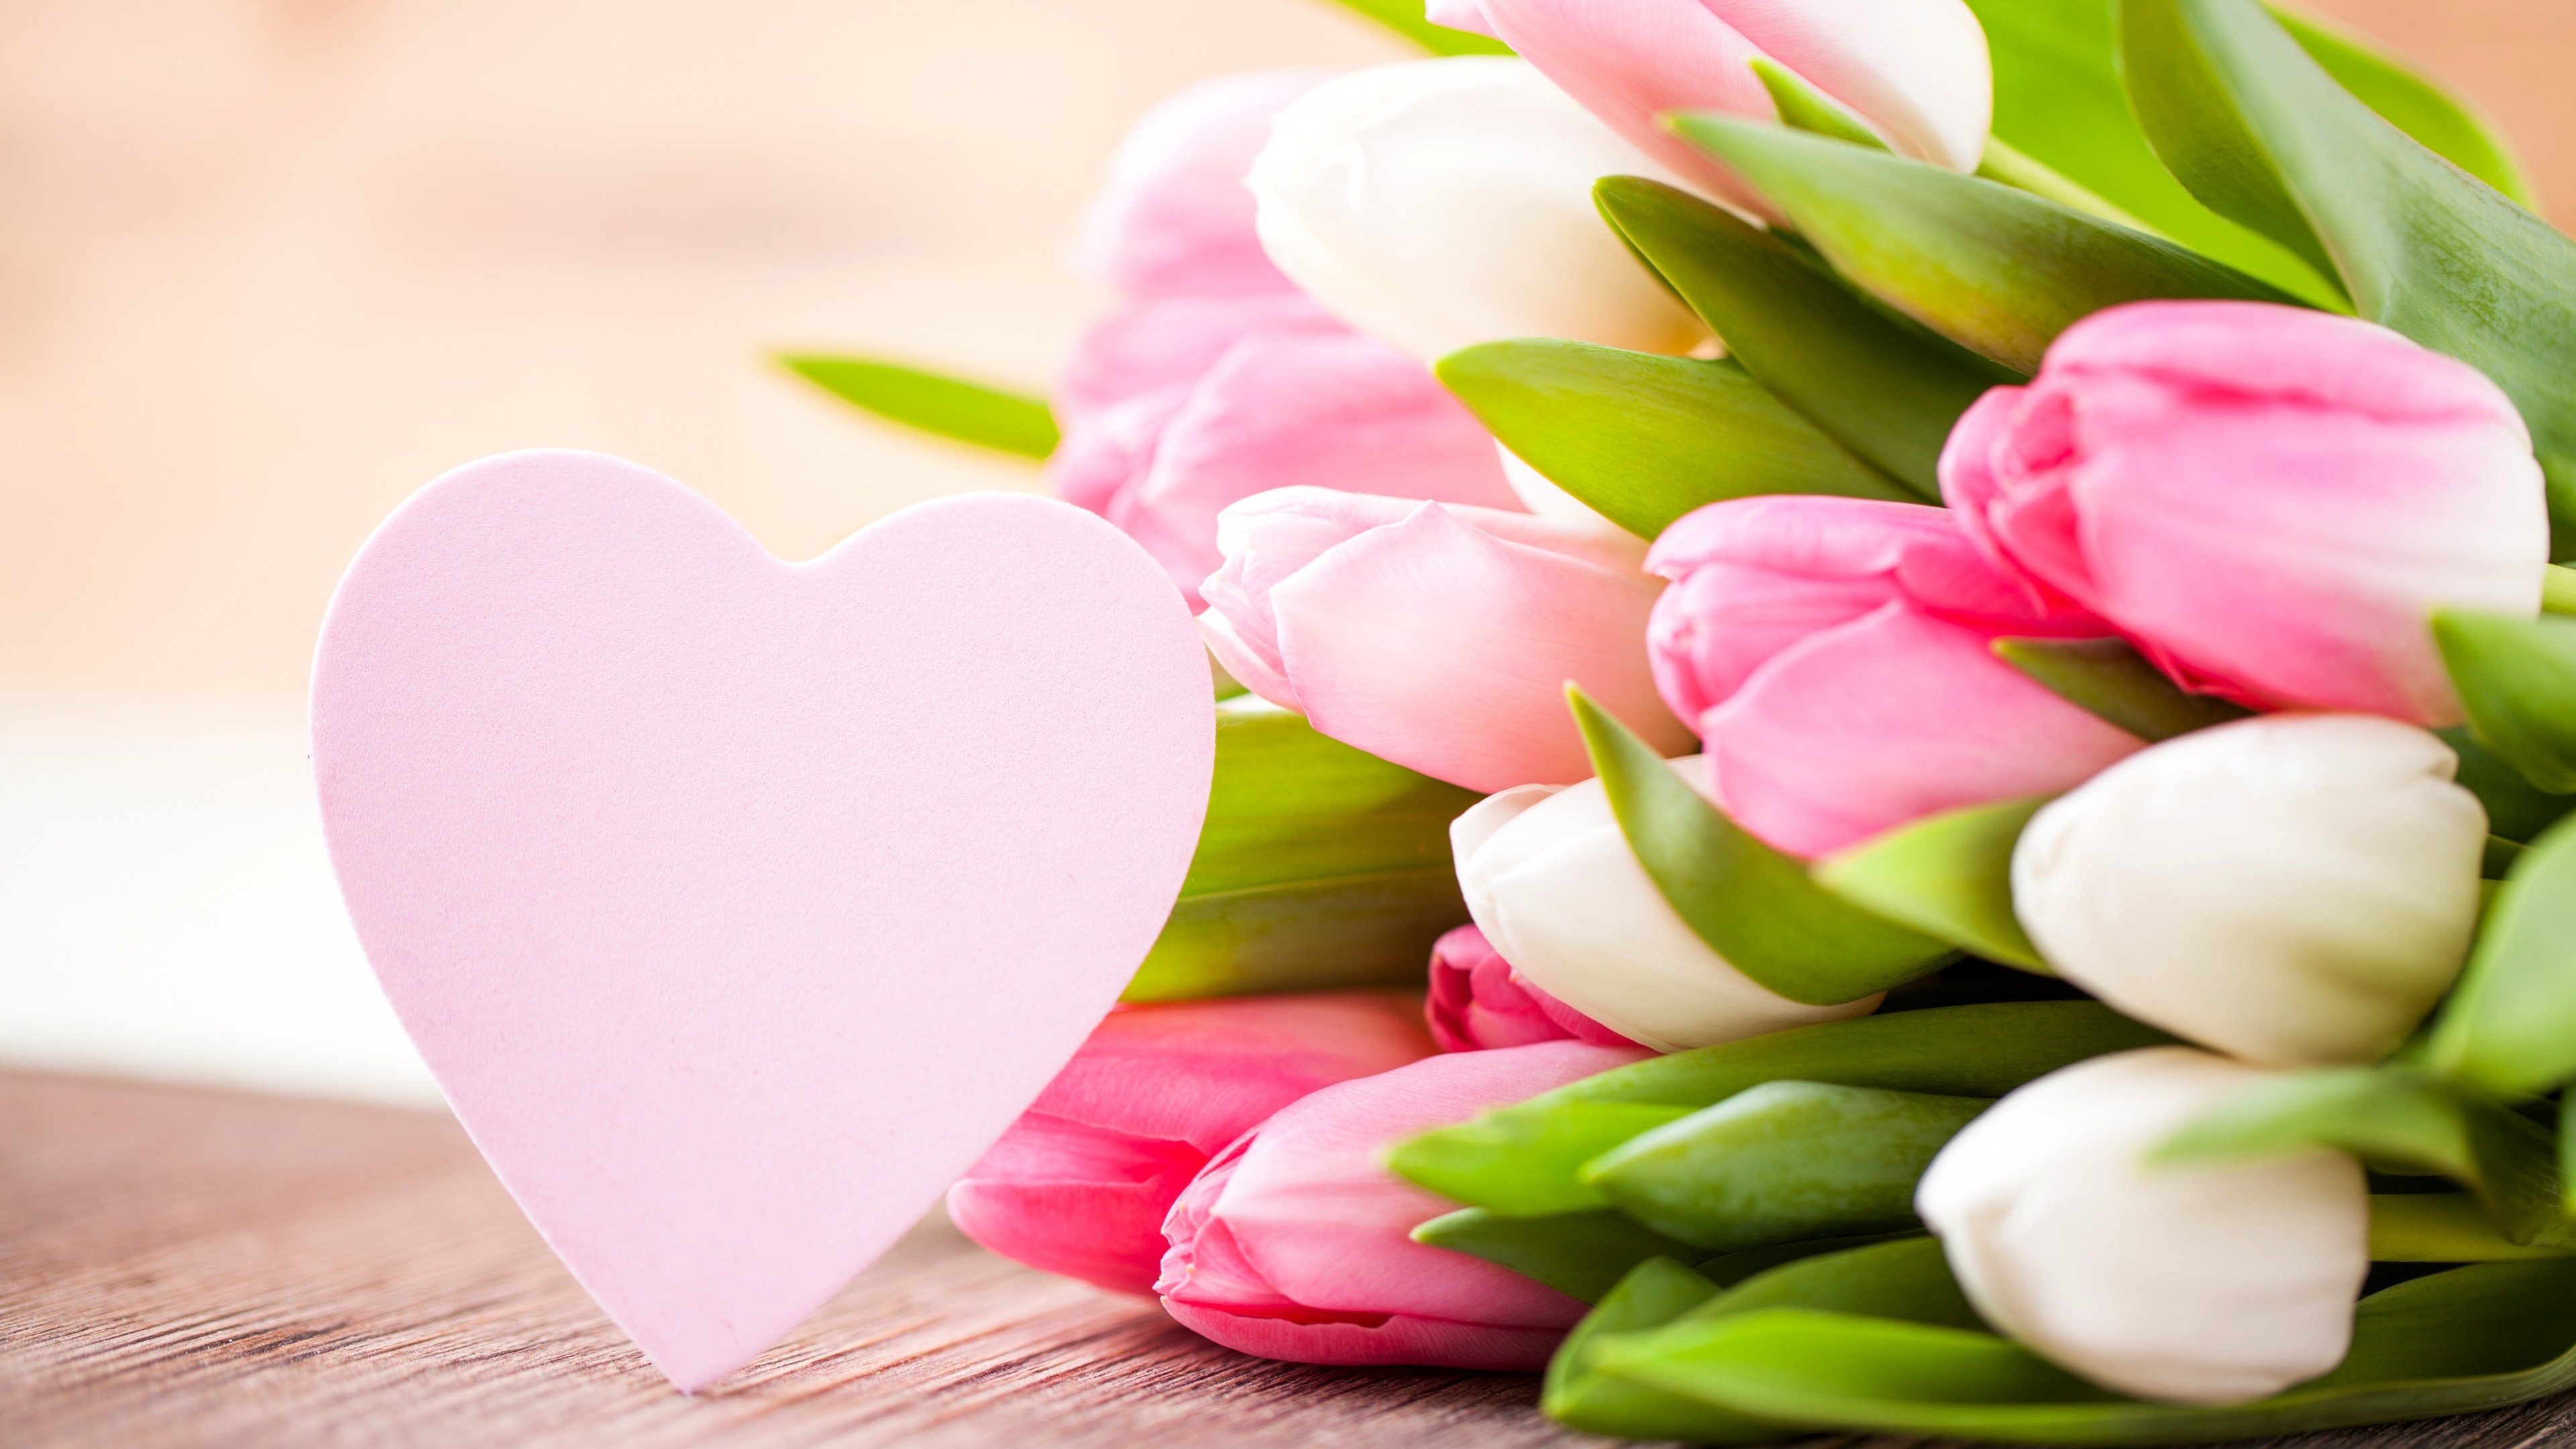 Valentine's day, Love and hearts, Romantic tulips, Holiday bliss, 3840x2160 4K Desktop